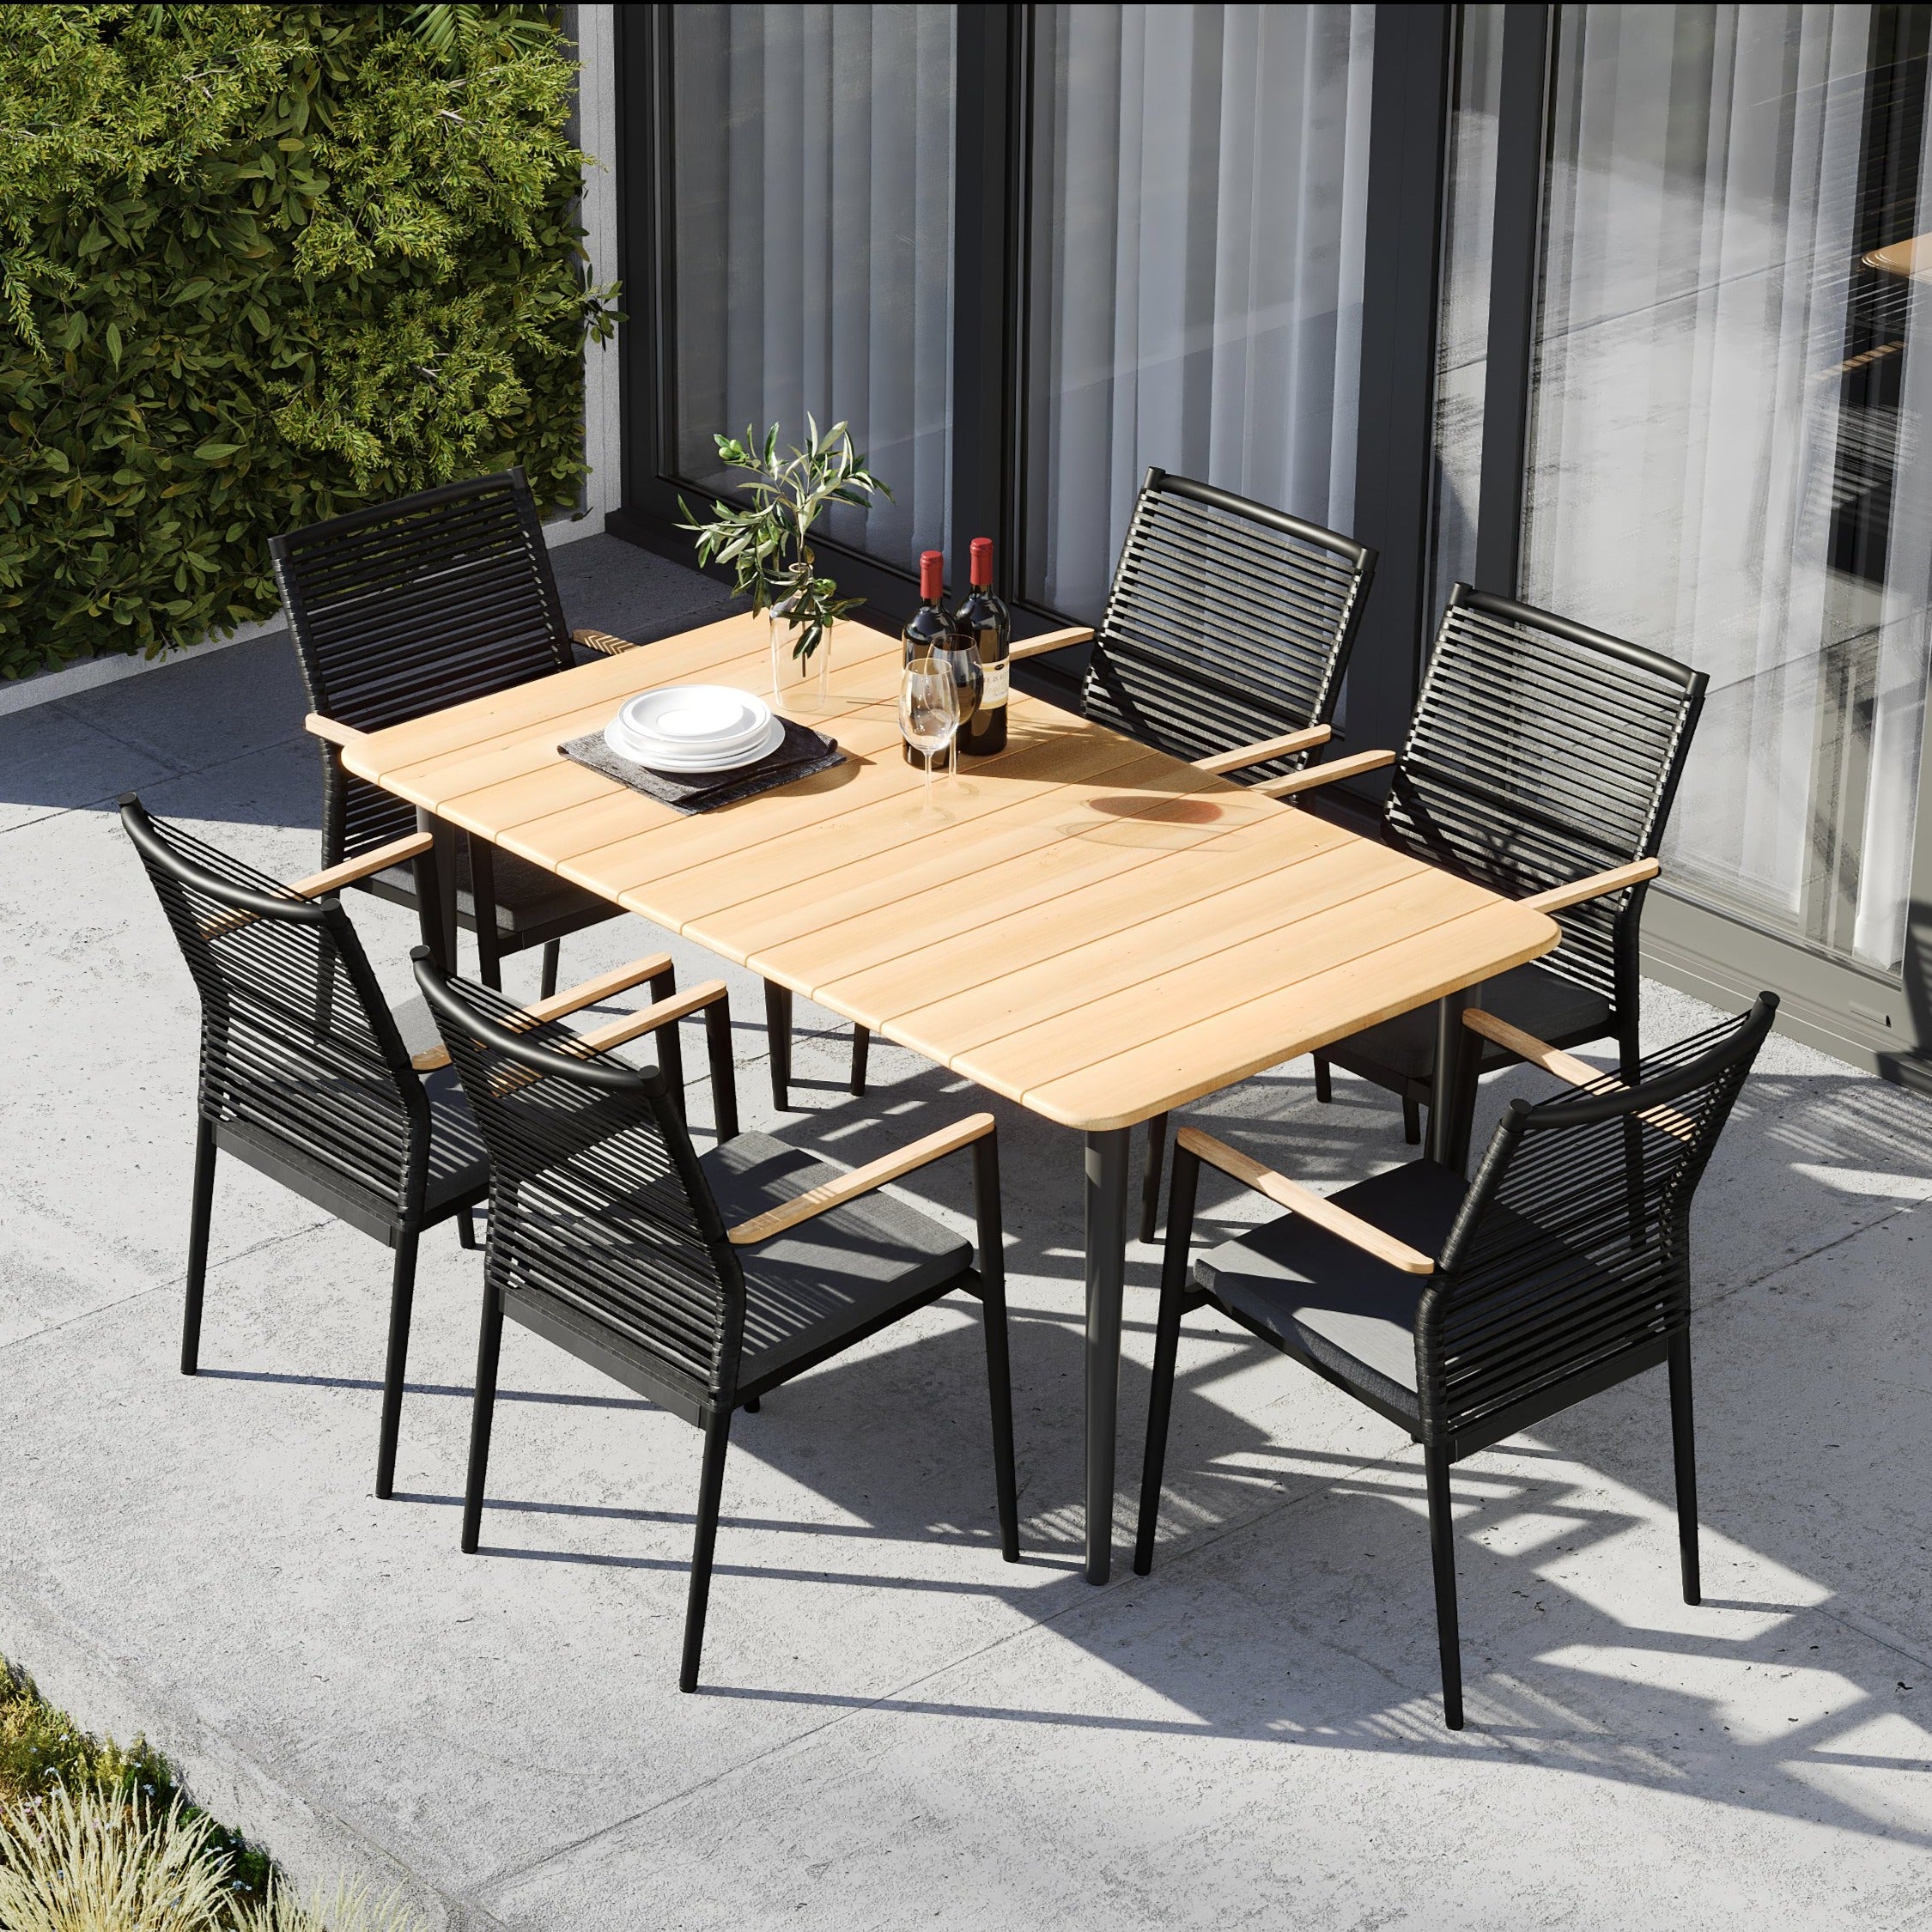 Portland 6 Seat Rectangular Dining Set with Teak Table in Charcoal